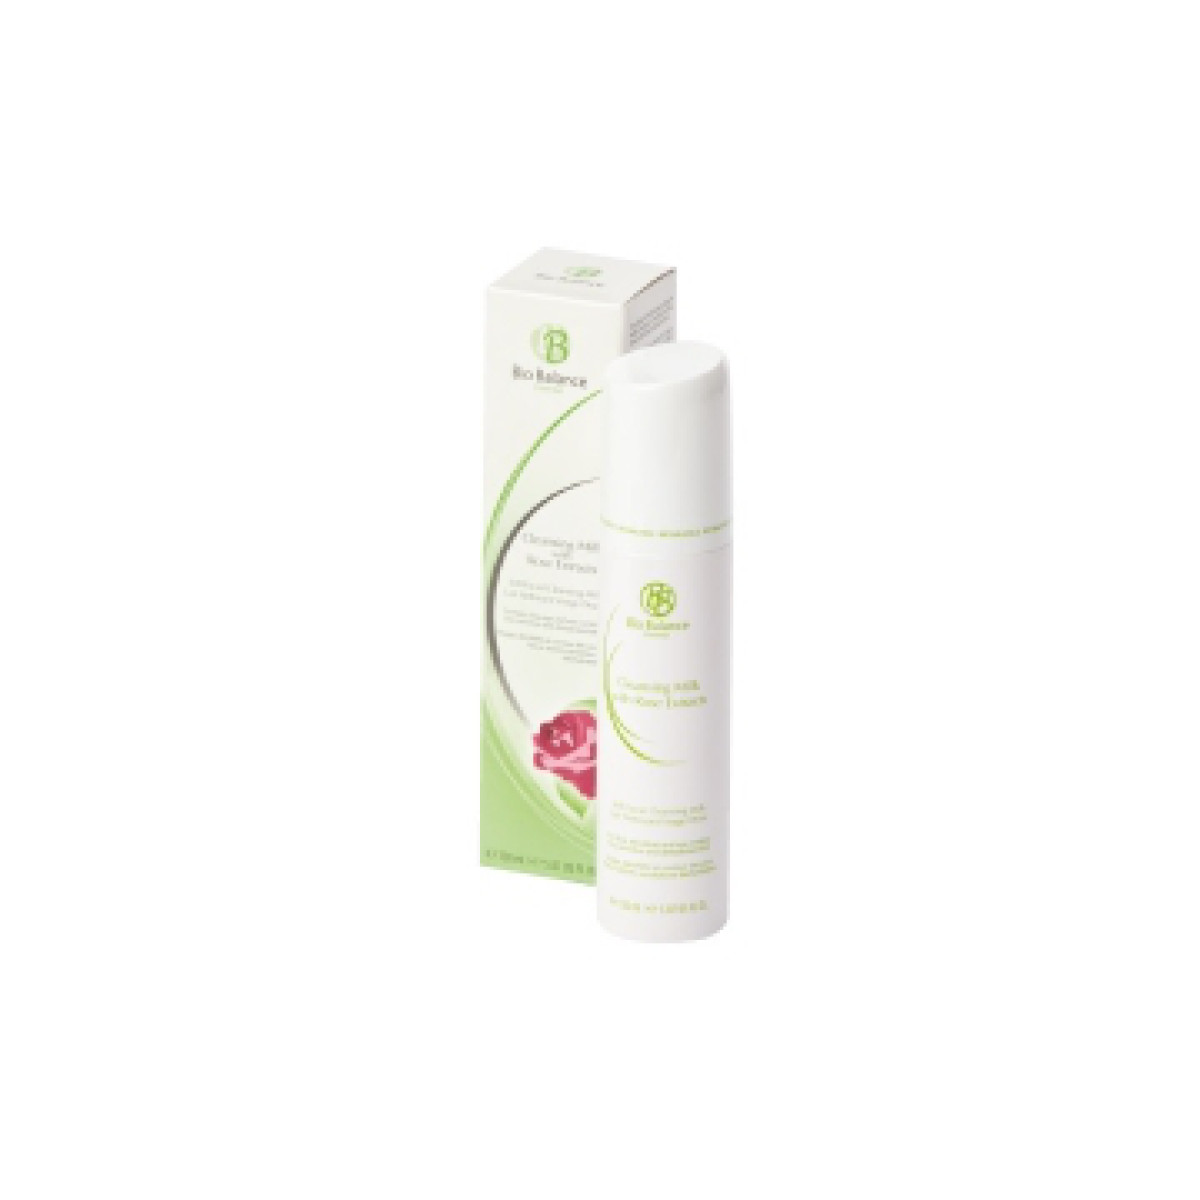 Lotion with rose extracts 150ml